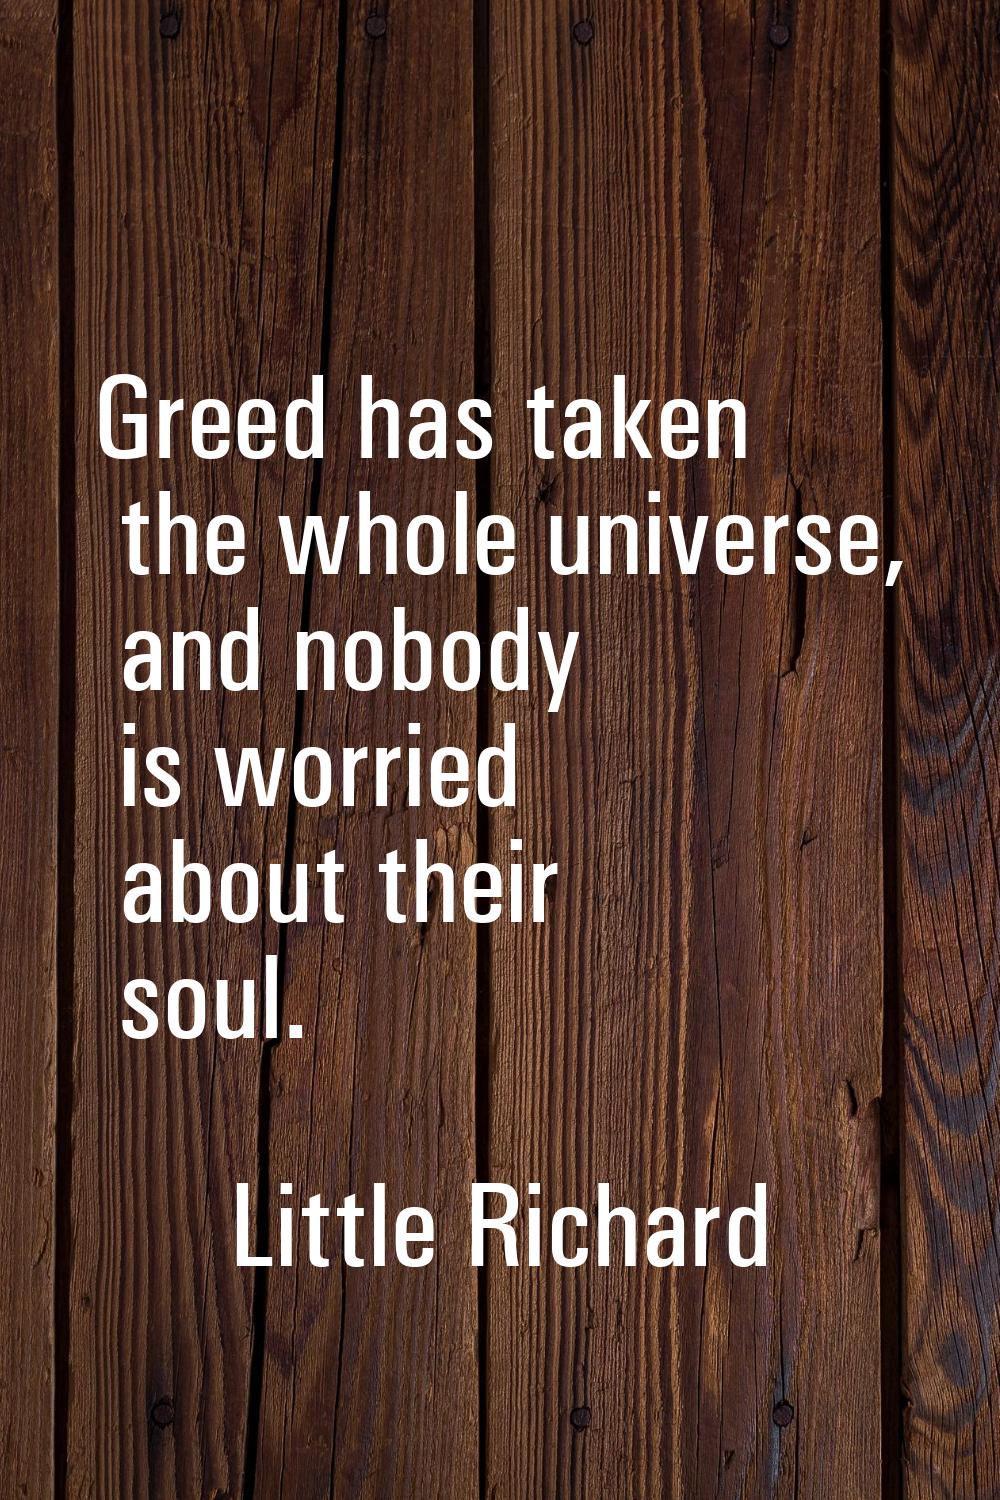 Greed has taken the whole universe, and nobody is worried about their soul.